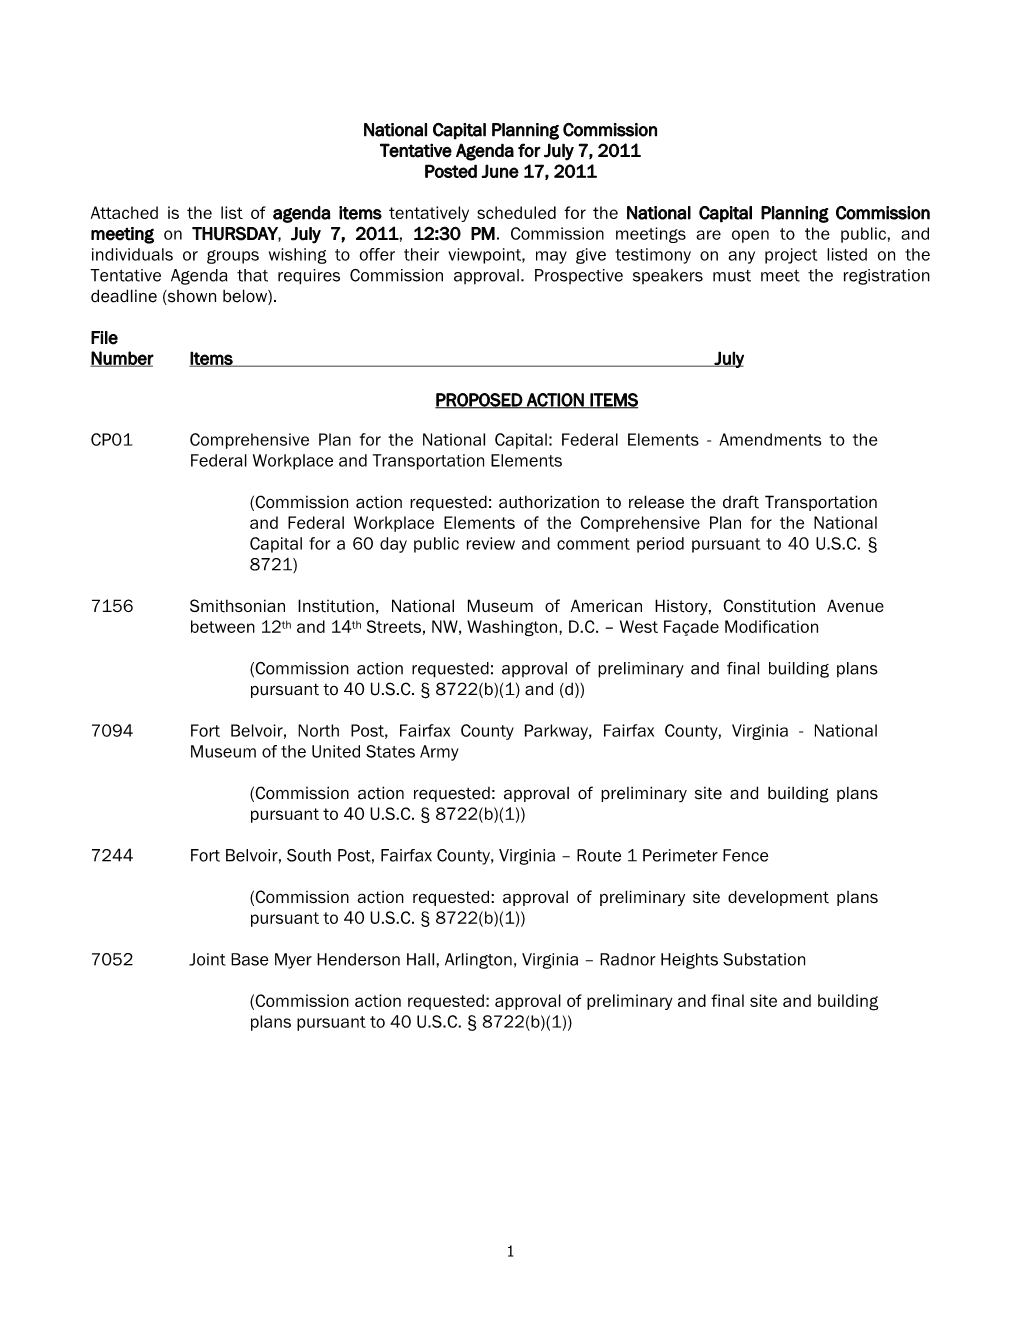 National Capital Planning Commission Tentative Agenda for July 7, 2011 Posted June 17, 2011